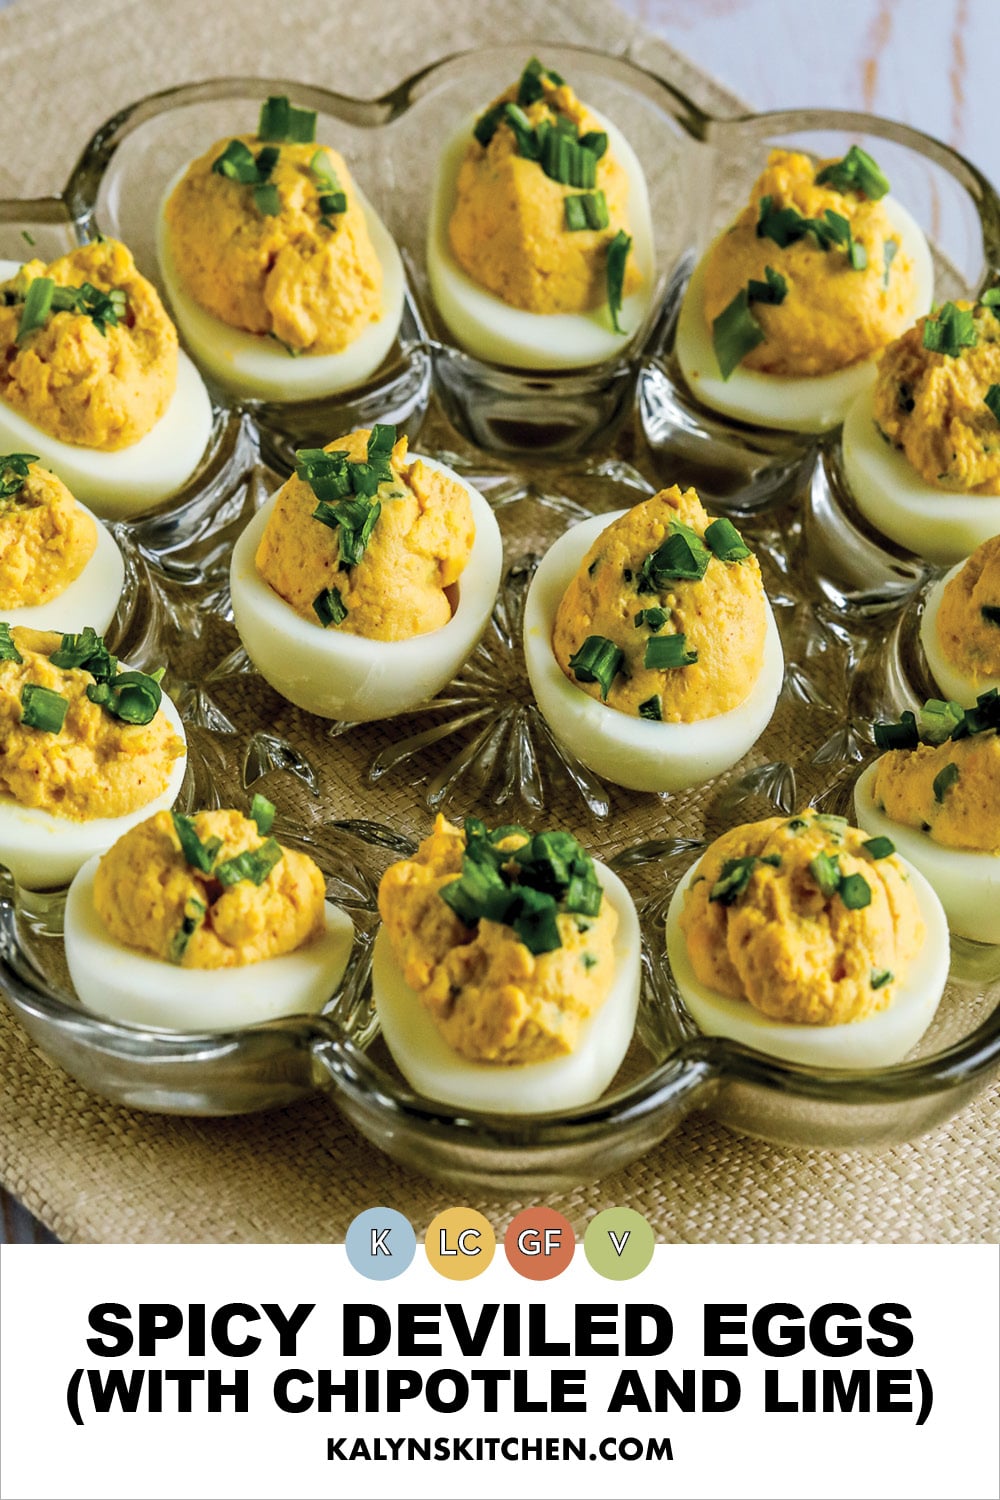 Pinterest image of Spicy Deviled Eggs (with Chipotle and Lime)